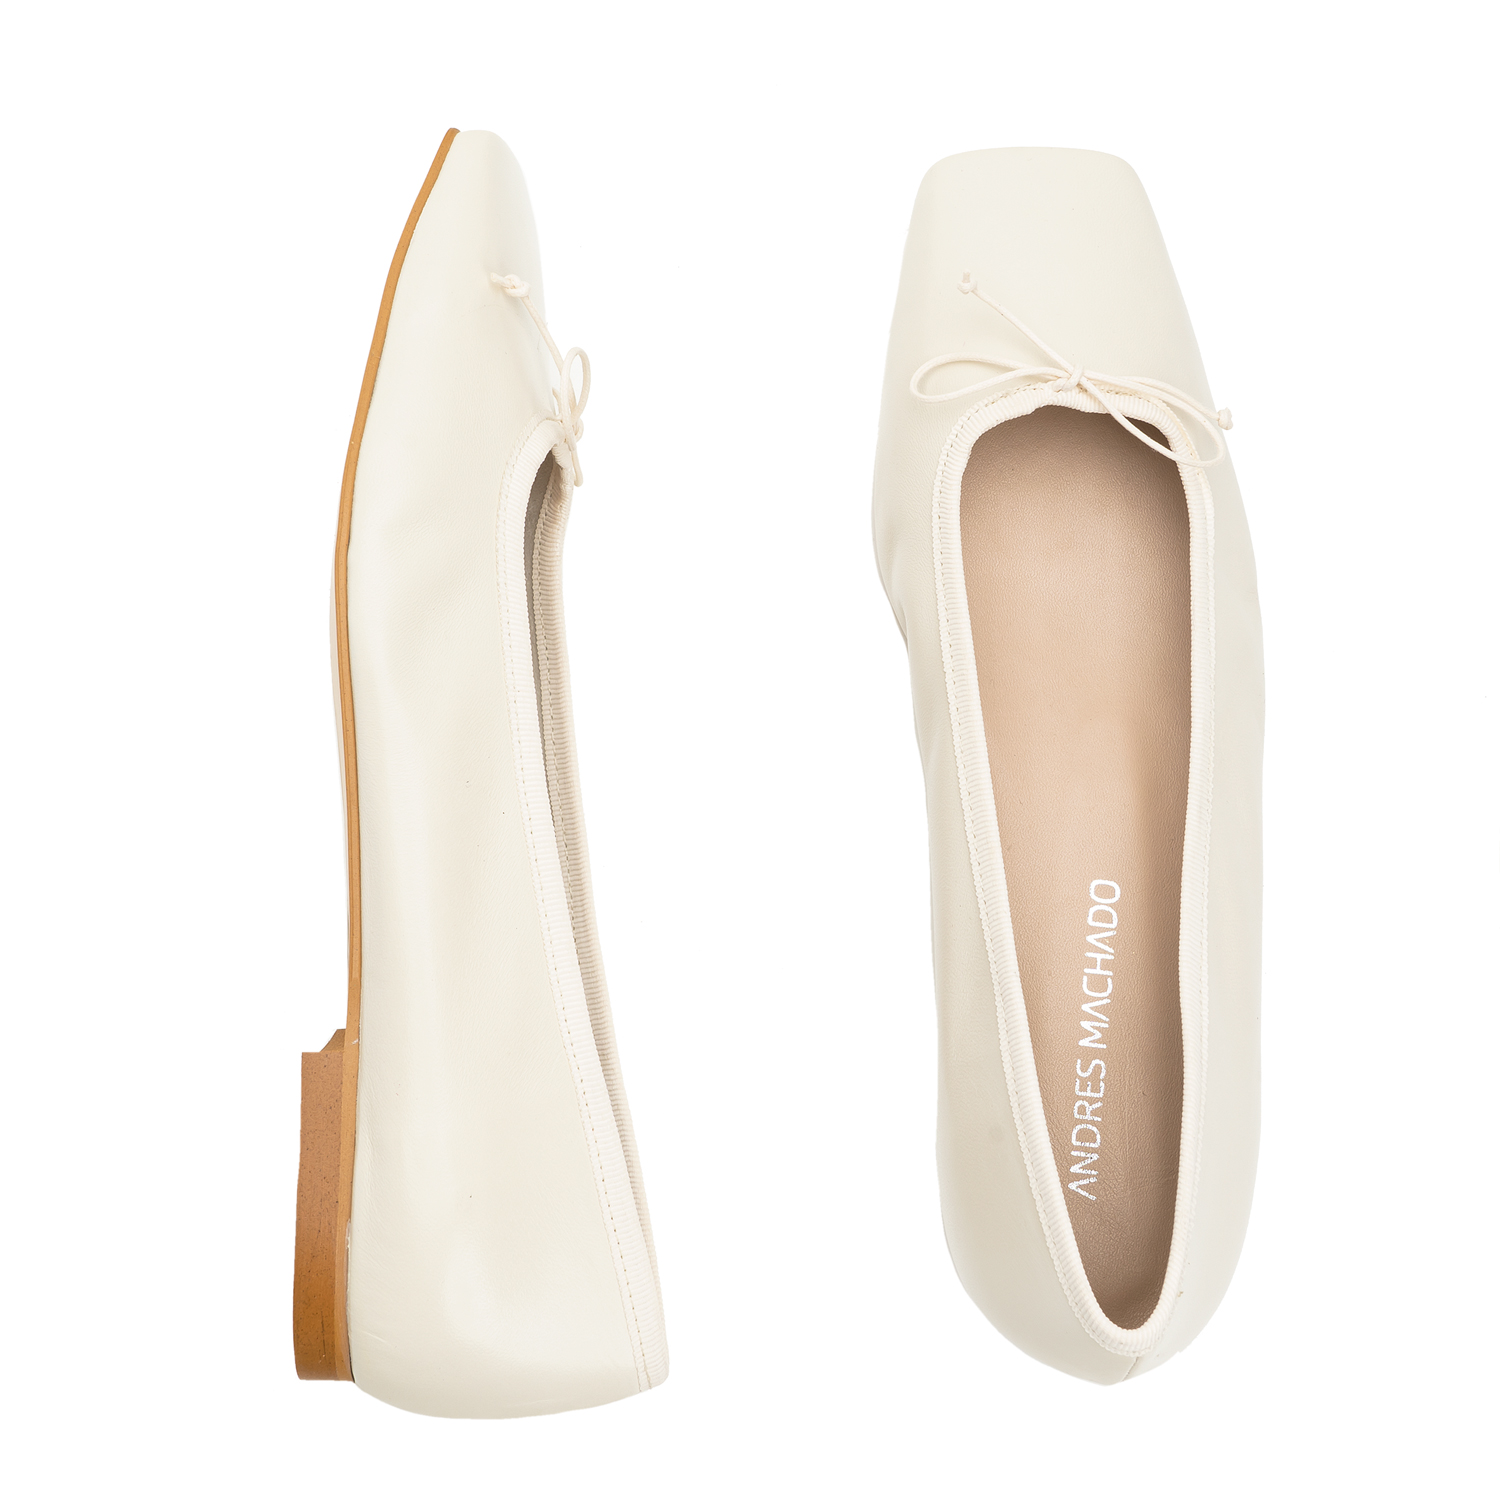 Ballerina Flats in Off White Leather 